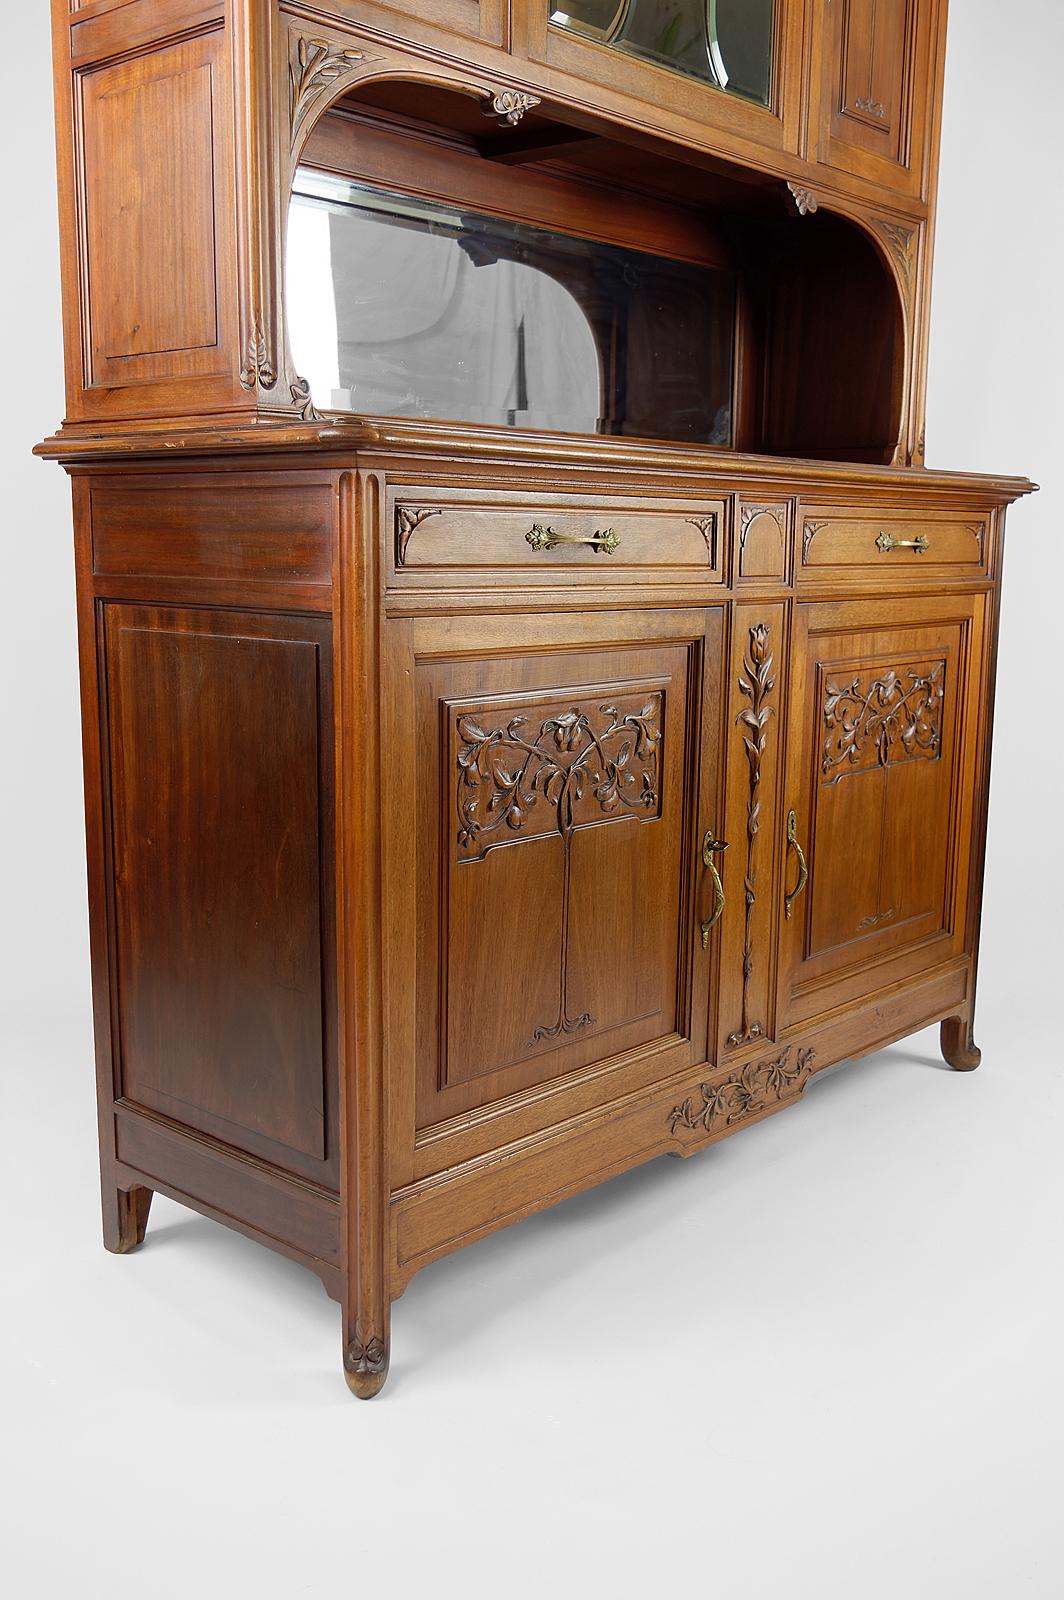 French Art Nouveau Sideboard in Carved Walnut with Stained Glass, circa 1910 For Sale 4